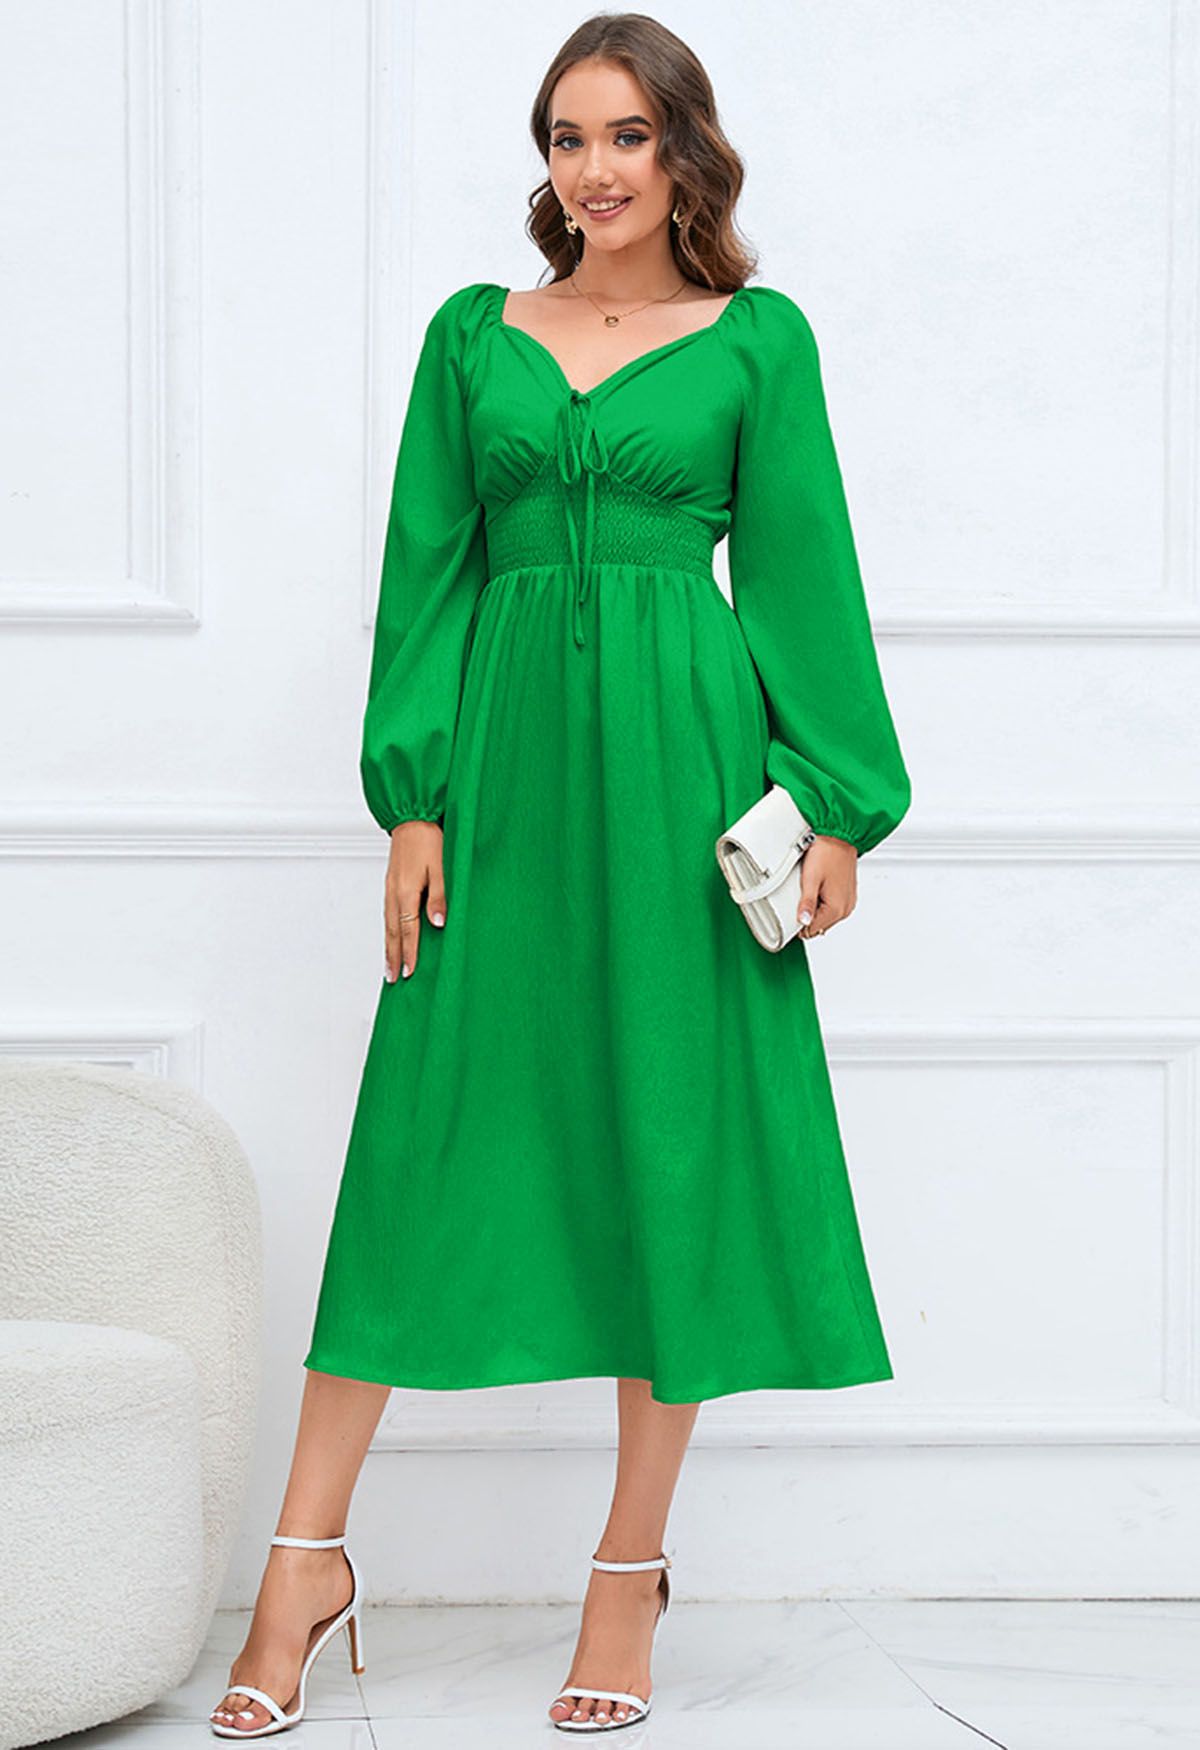 Sweetheart Neck Tie Front Midi Dress in Green - Retro, Indie and Unique ...